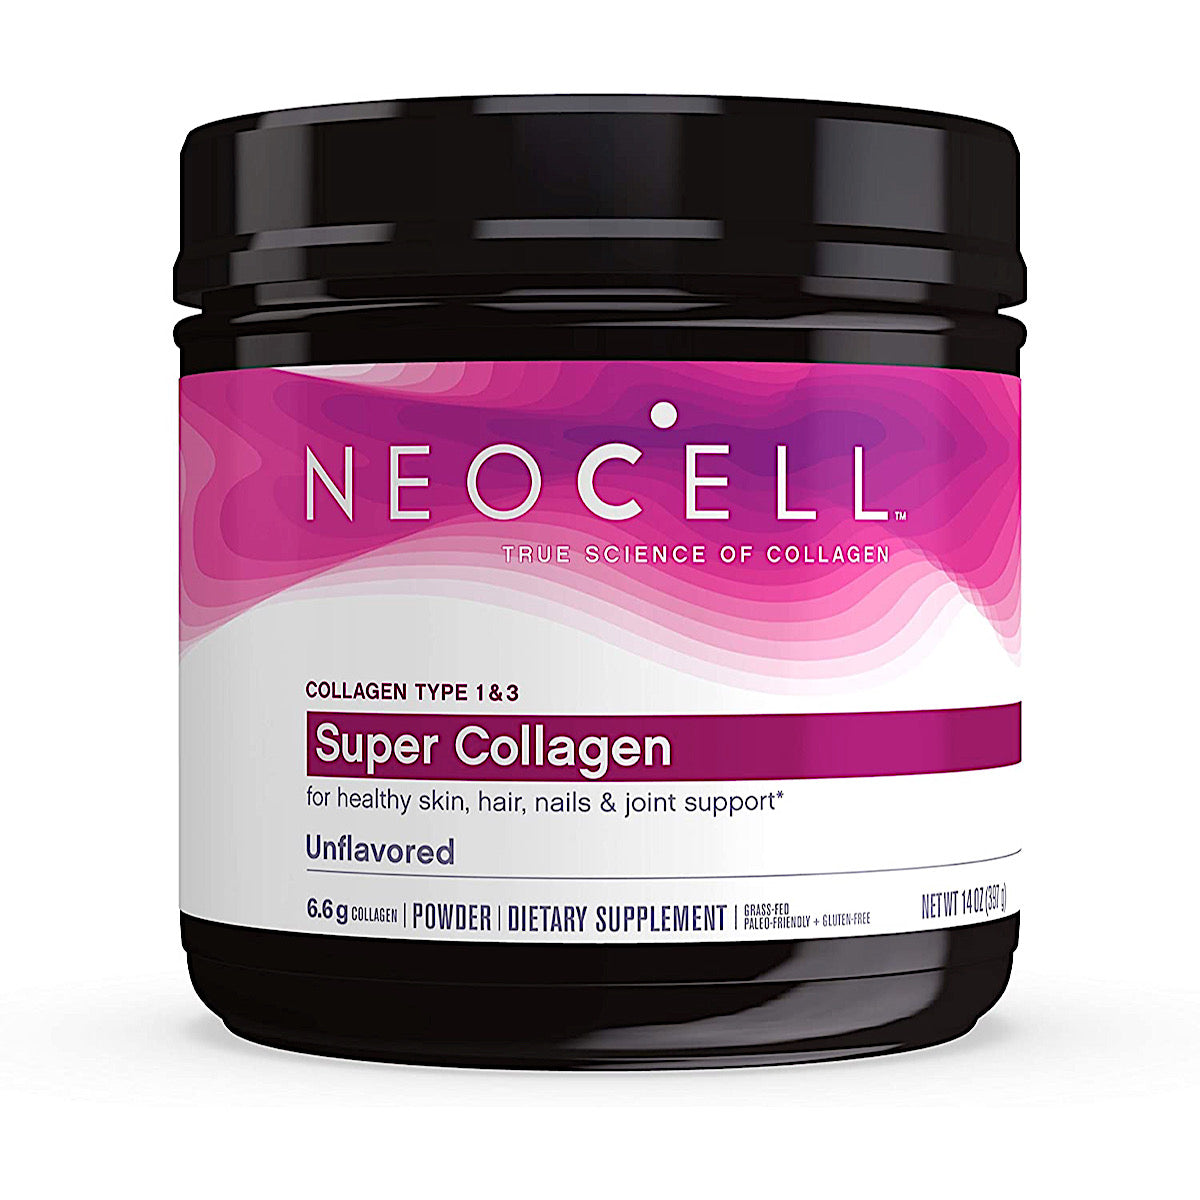 Neocell Unflavored Super Collagen Powder, 14 Ounce